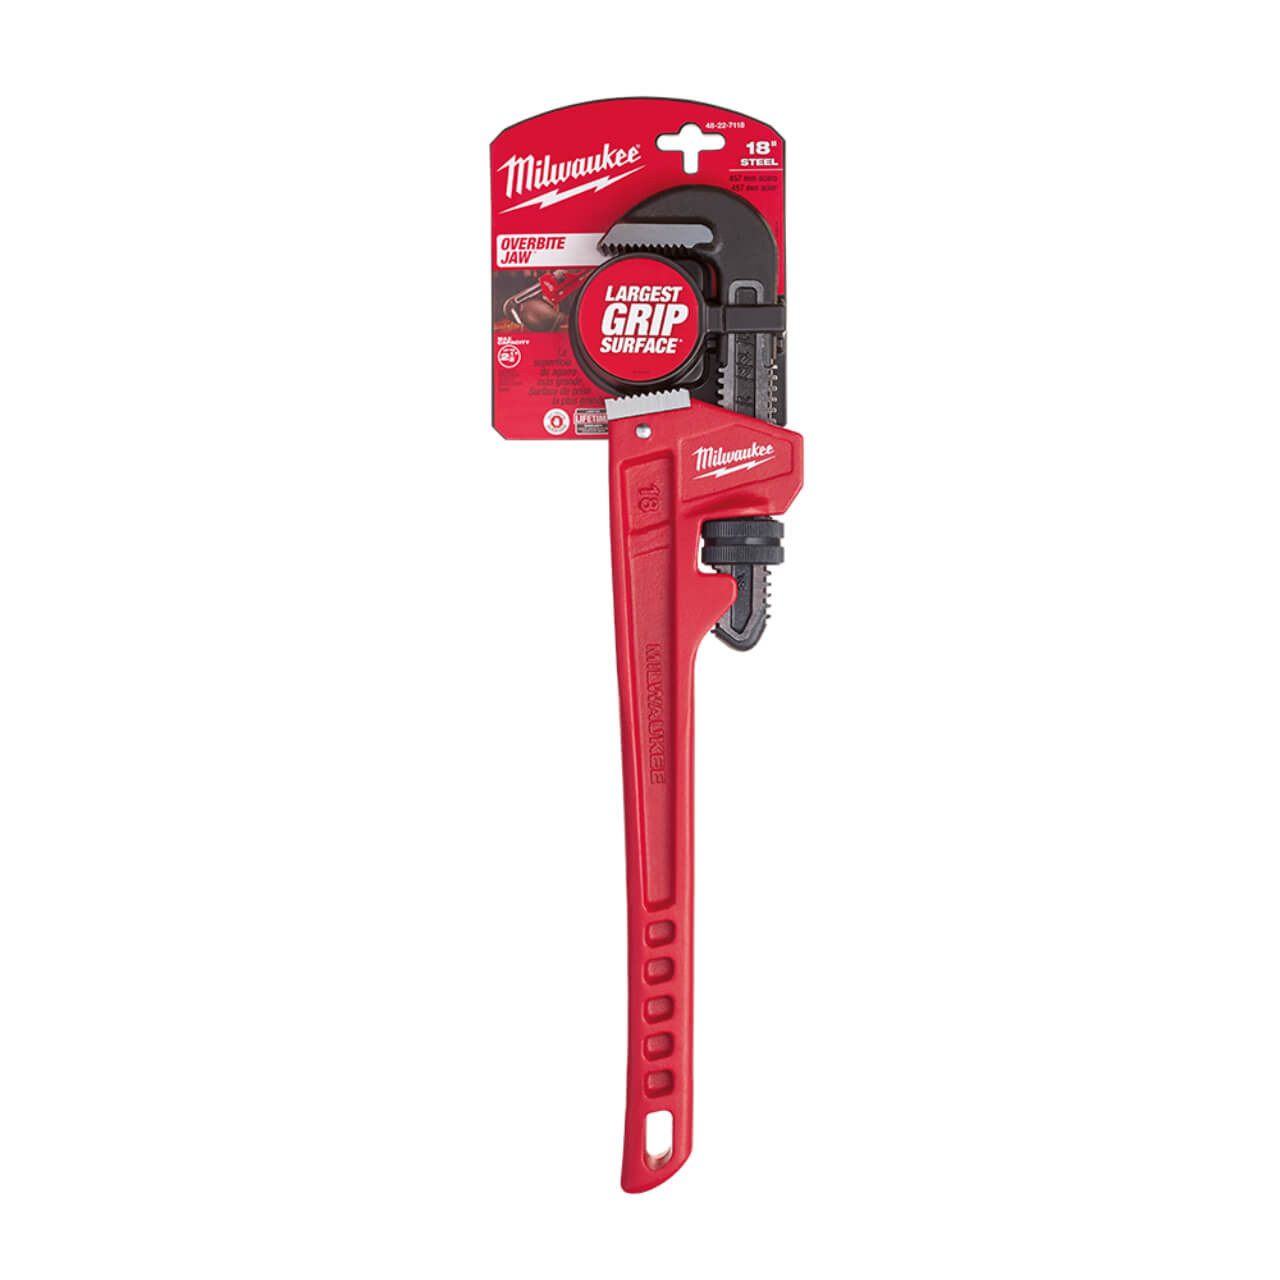 Milwaukee 457mm Steel Pipe Wrench